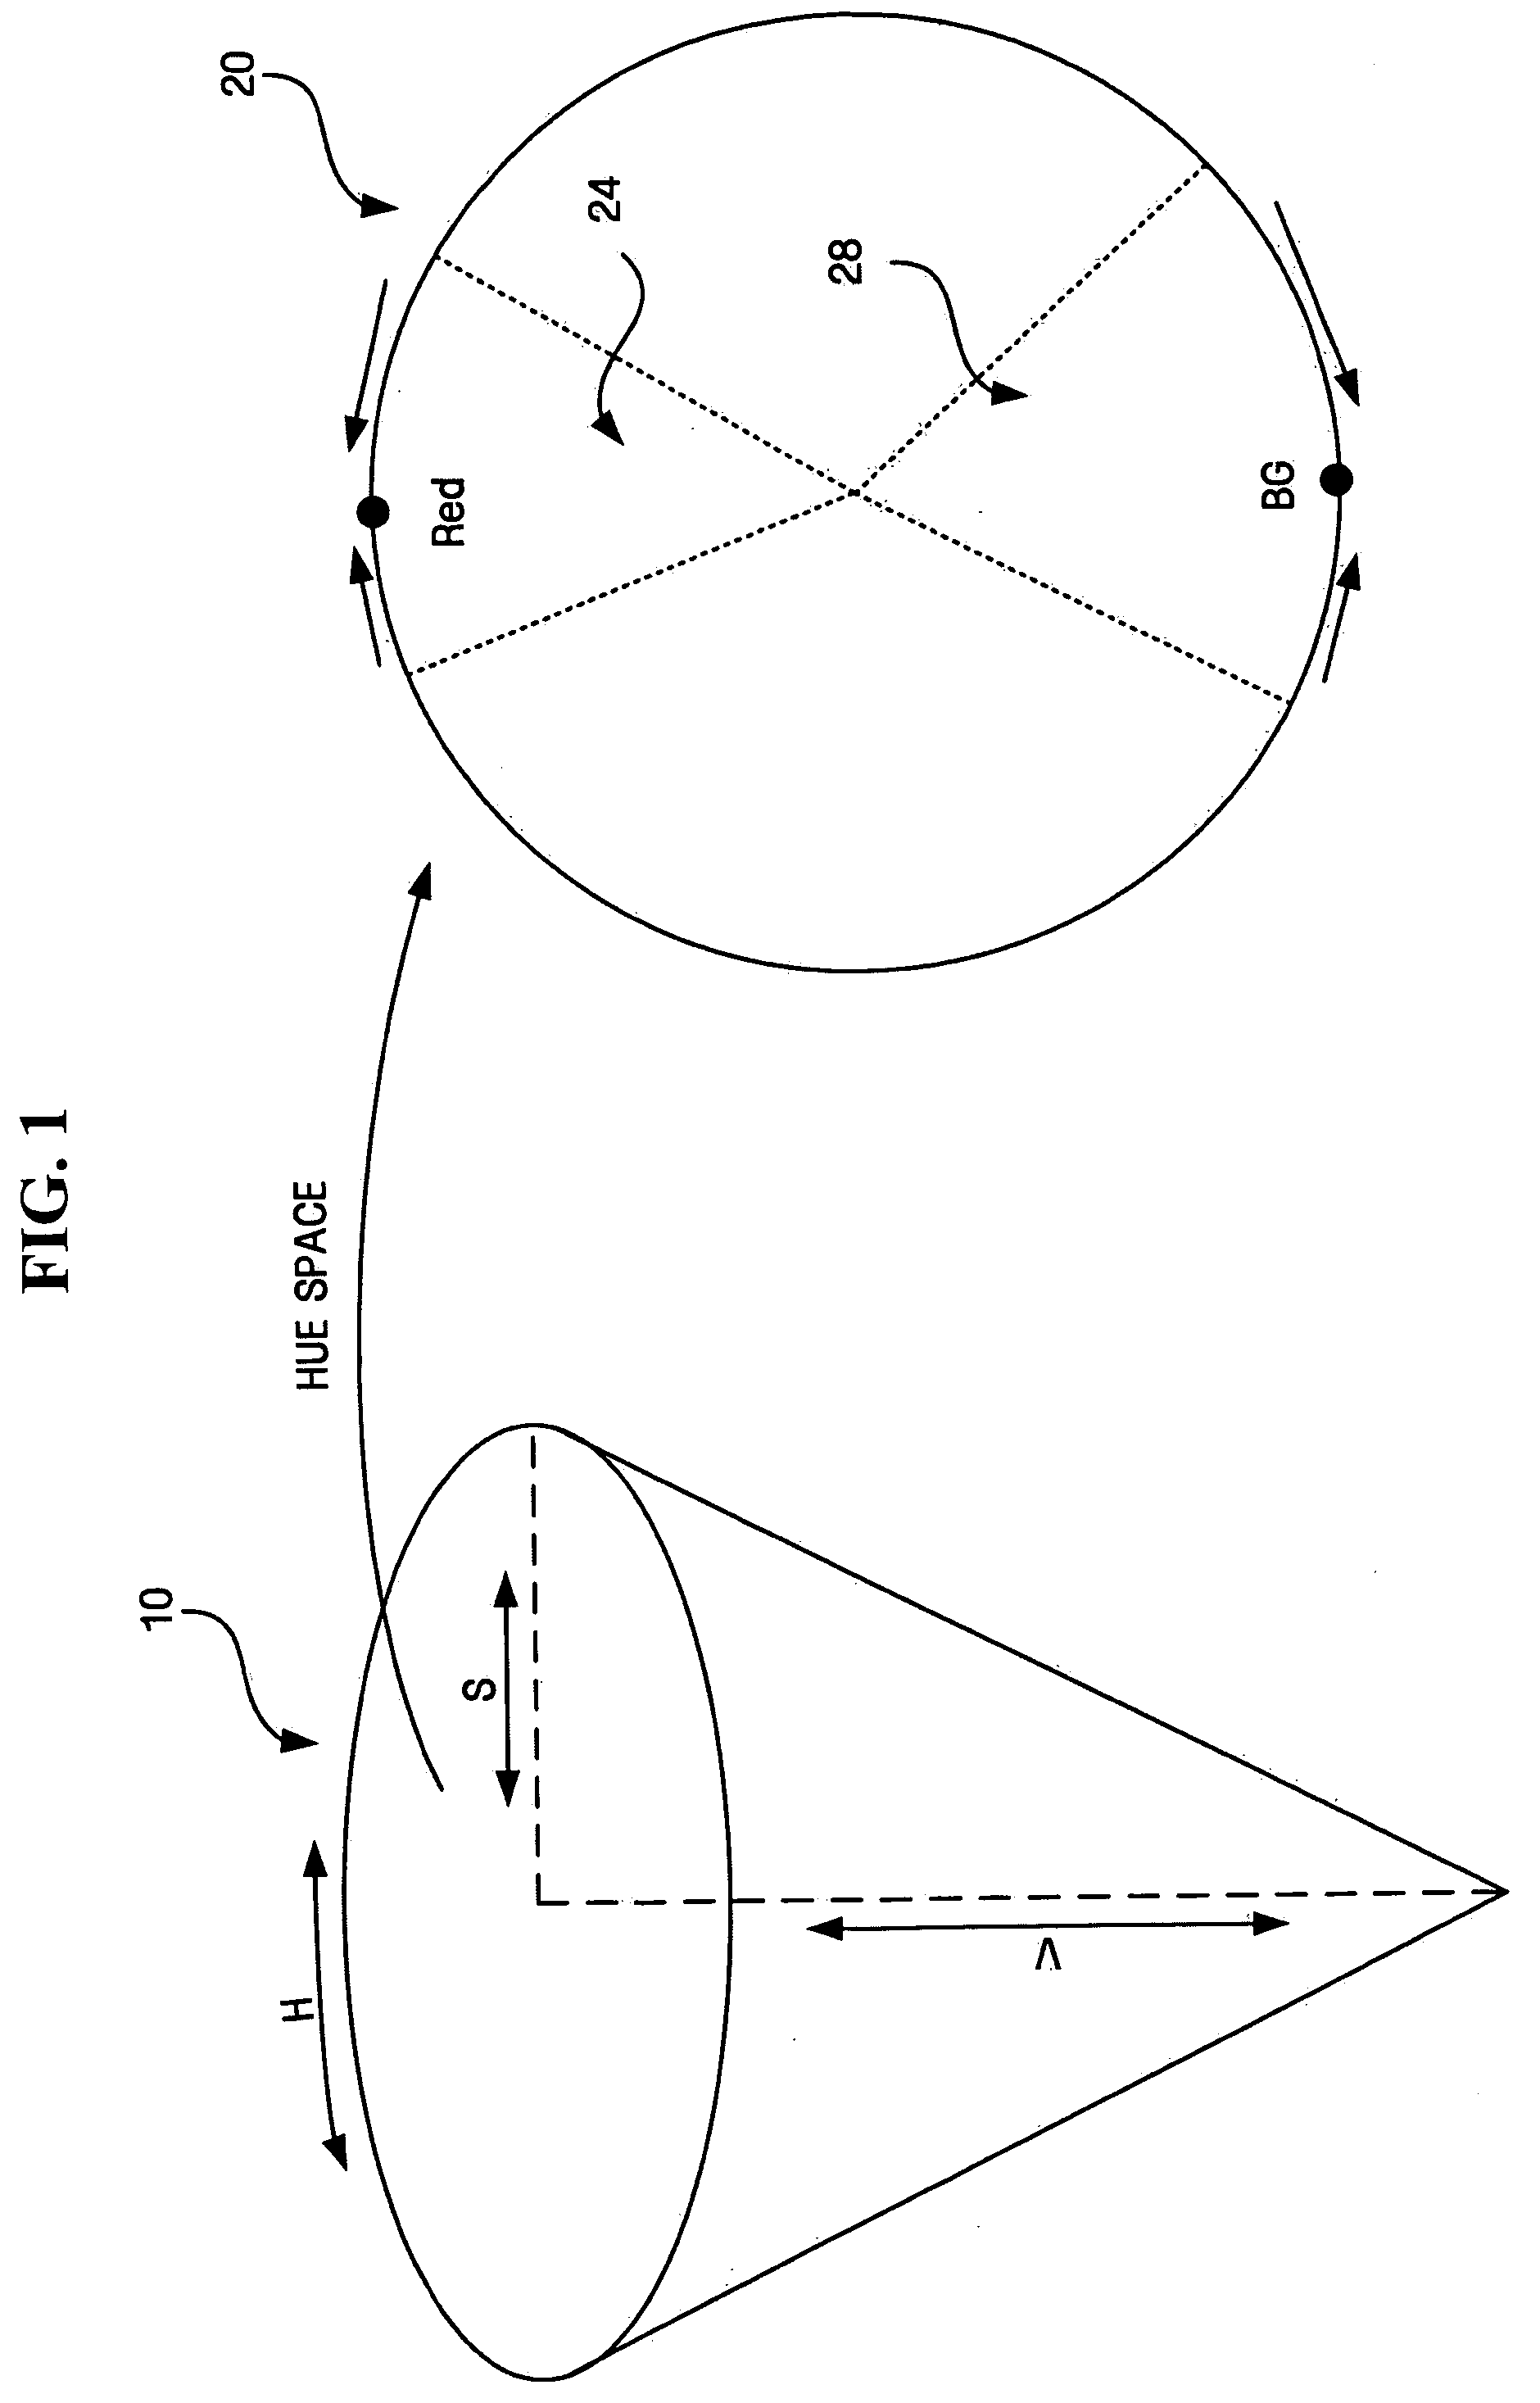 Method and apparatus for improving quality of images using complementary hues